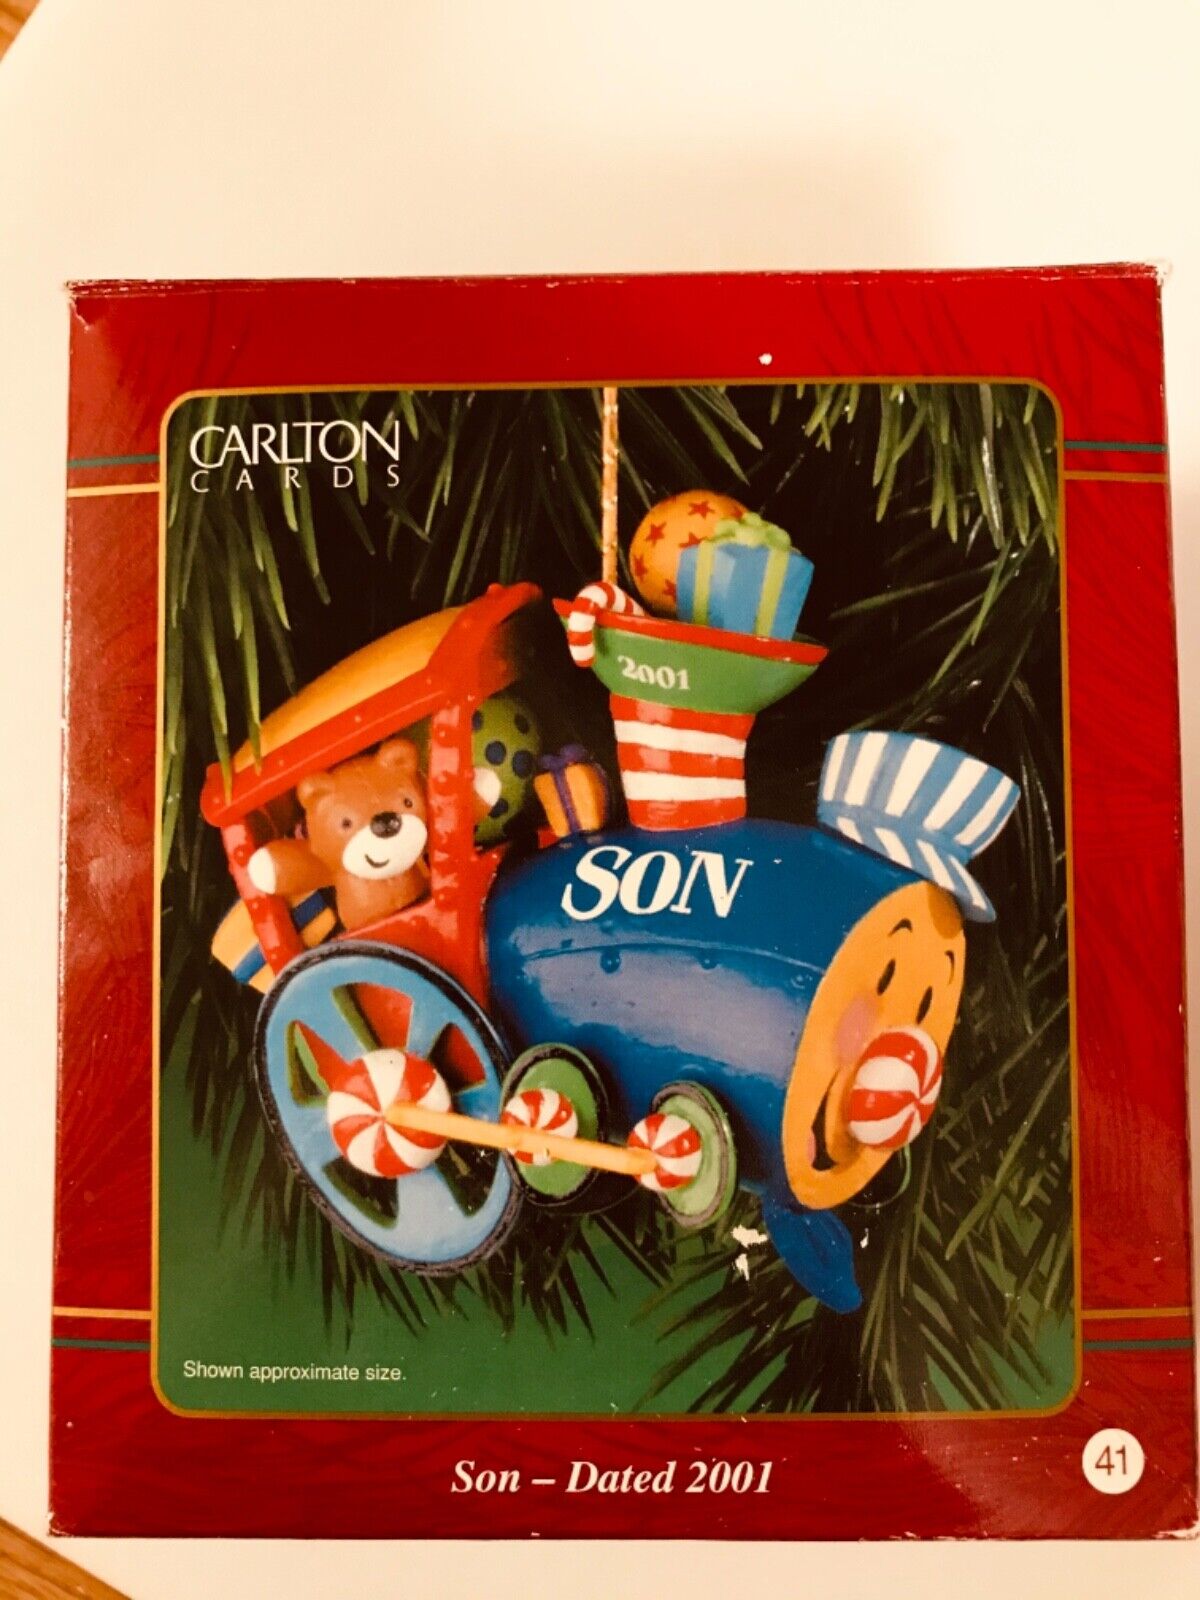 Carlton Cards Son - Dated 2001 collectible Christmas ornament, preowned in box